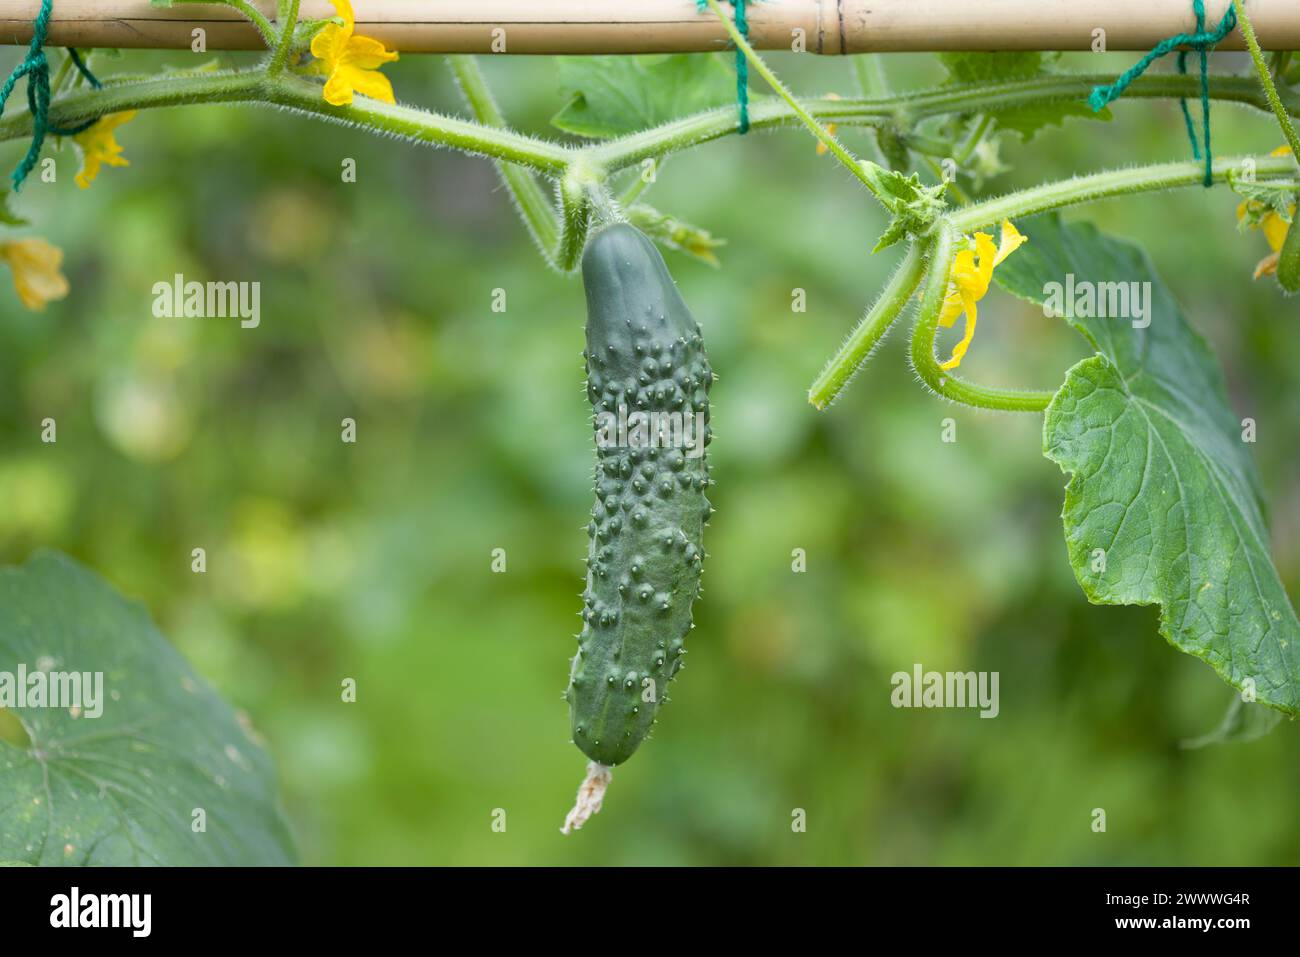 Close-up of cucumber (Bedfordshire Prize ridged cucumbers) growing on a plant in an English garden in summer, UK Stock Photo